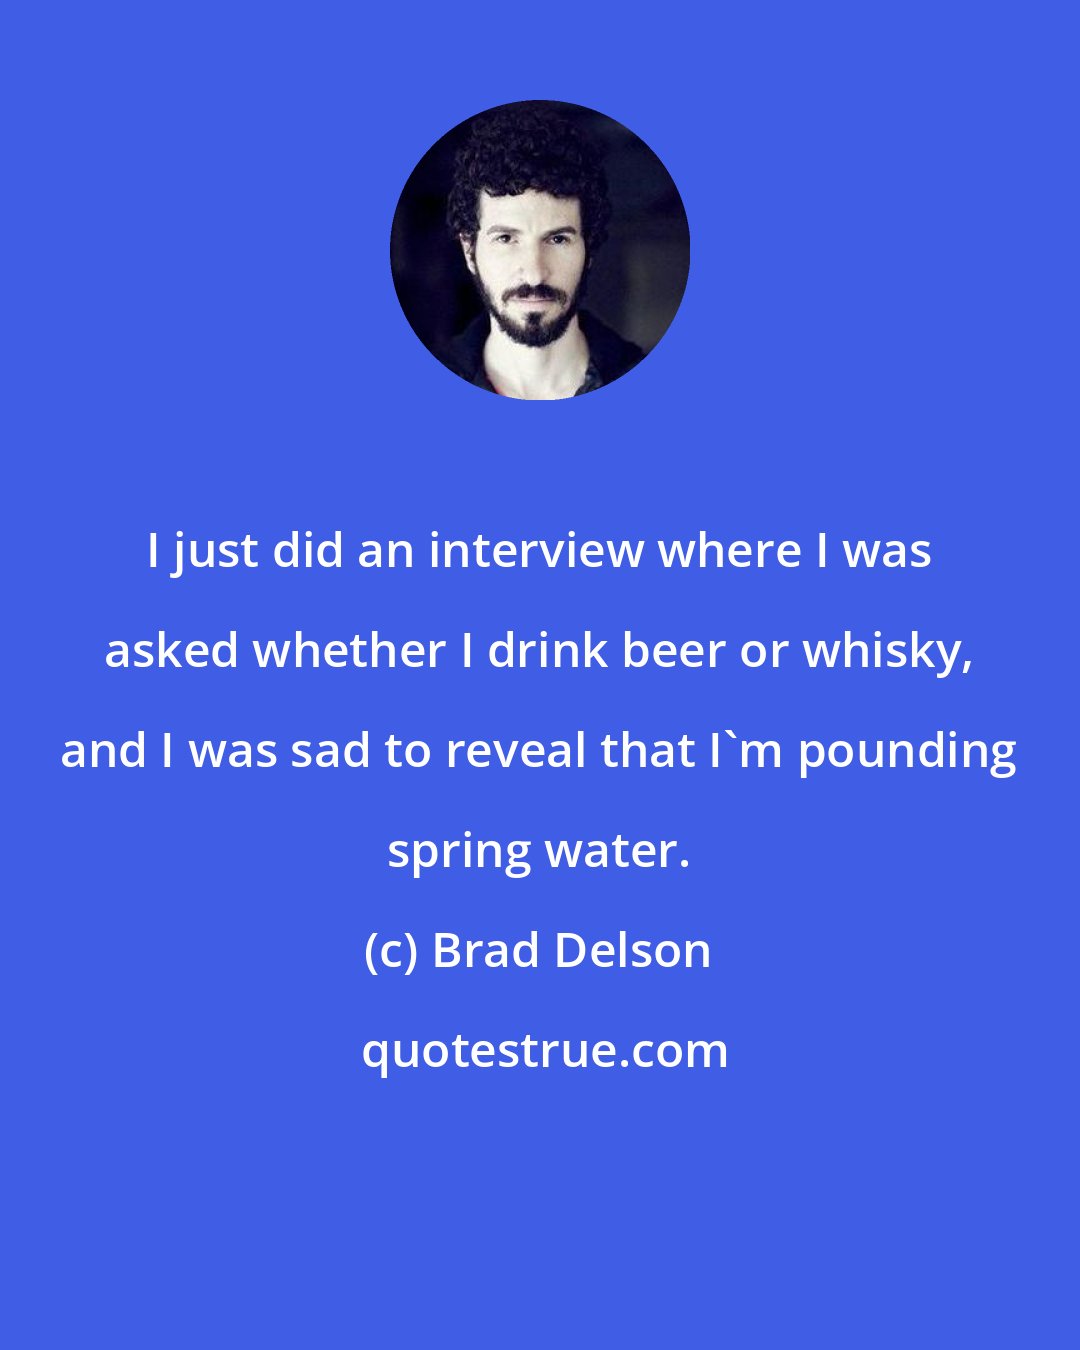 Brad Delson: I just did an interview where I was asked whether I drink beer or whisky, and I was sad to reveal that I'm pounding spring water.